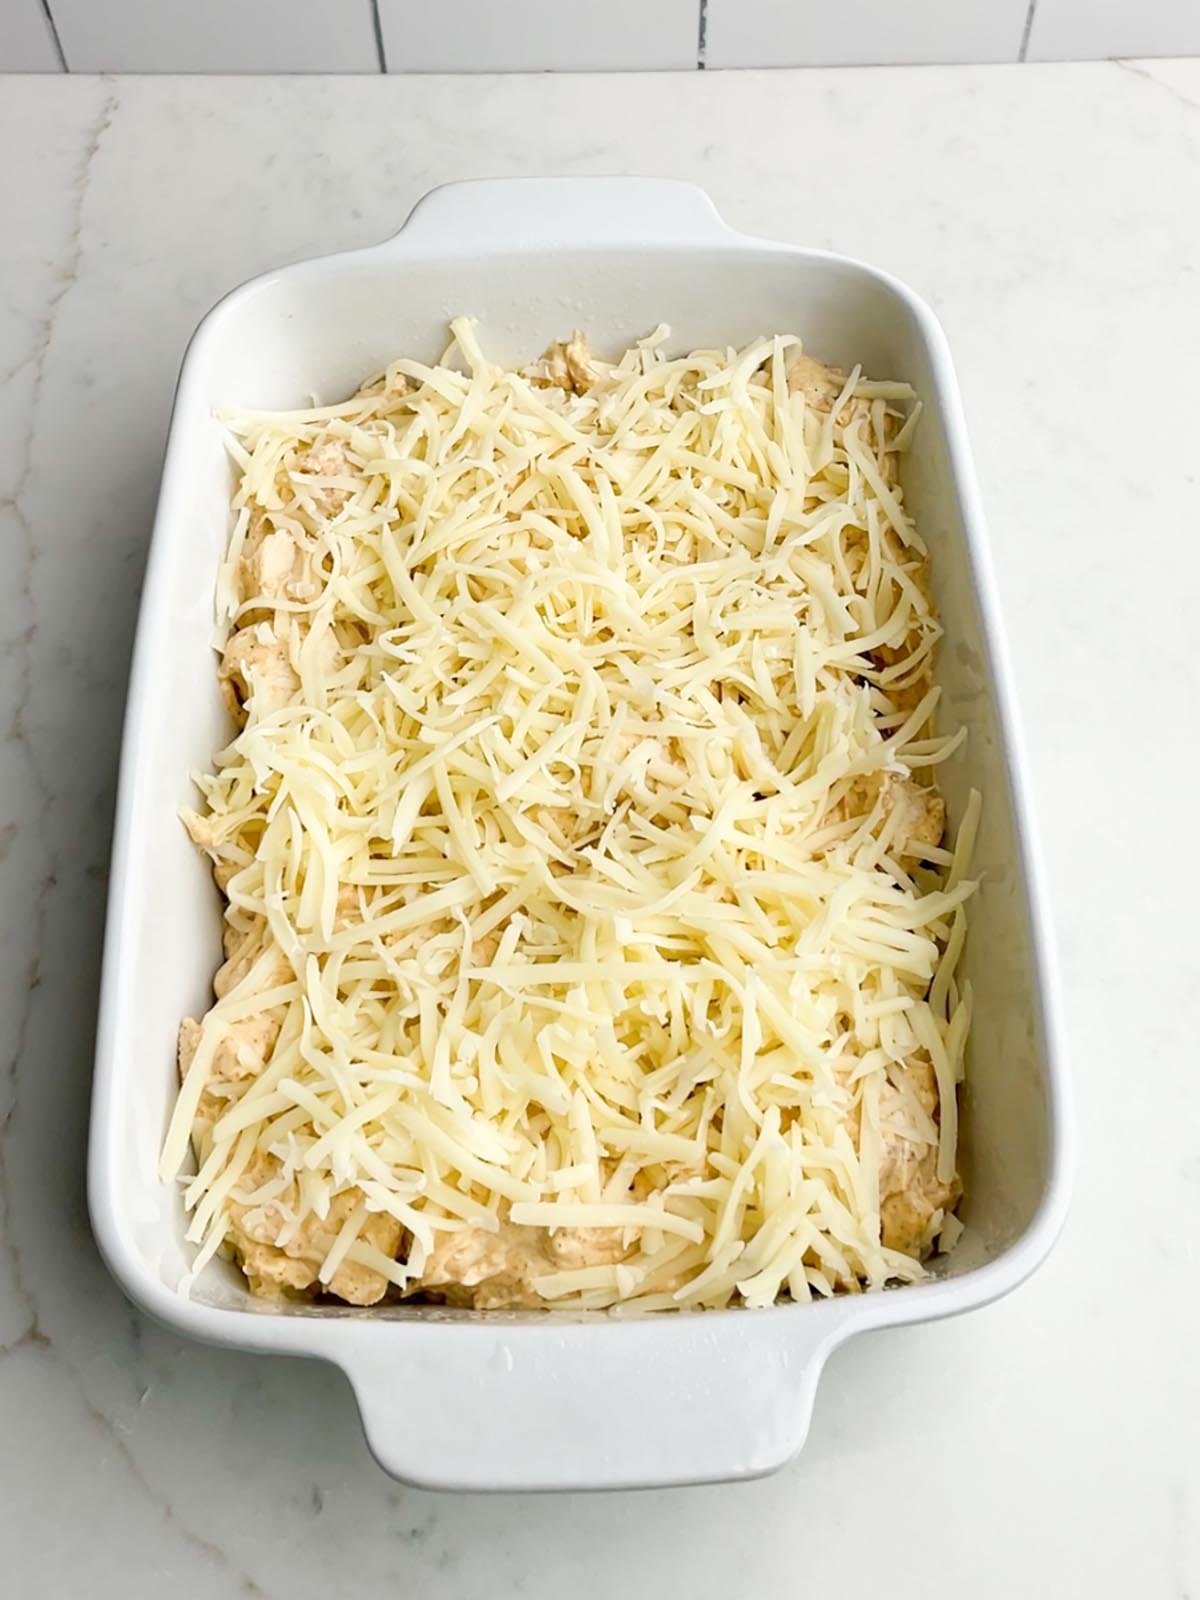 Swiss cheese on top of chicken mixture in white casserole dish